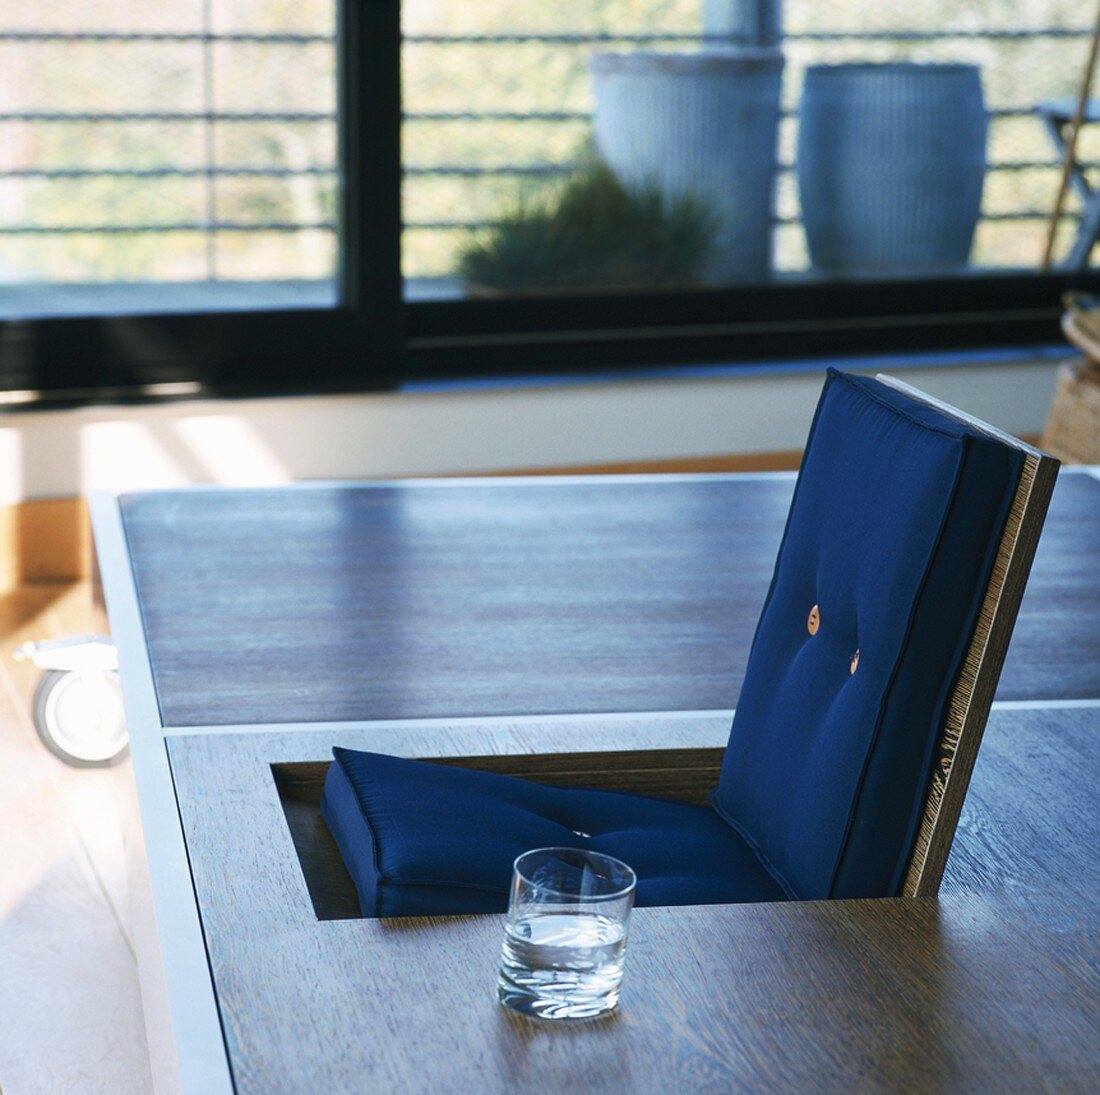 Glass of water on designer table with integrated folding chair; large, modern sliding glass doors in background